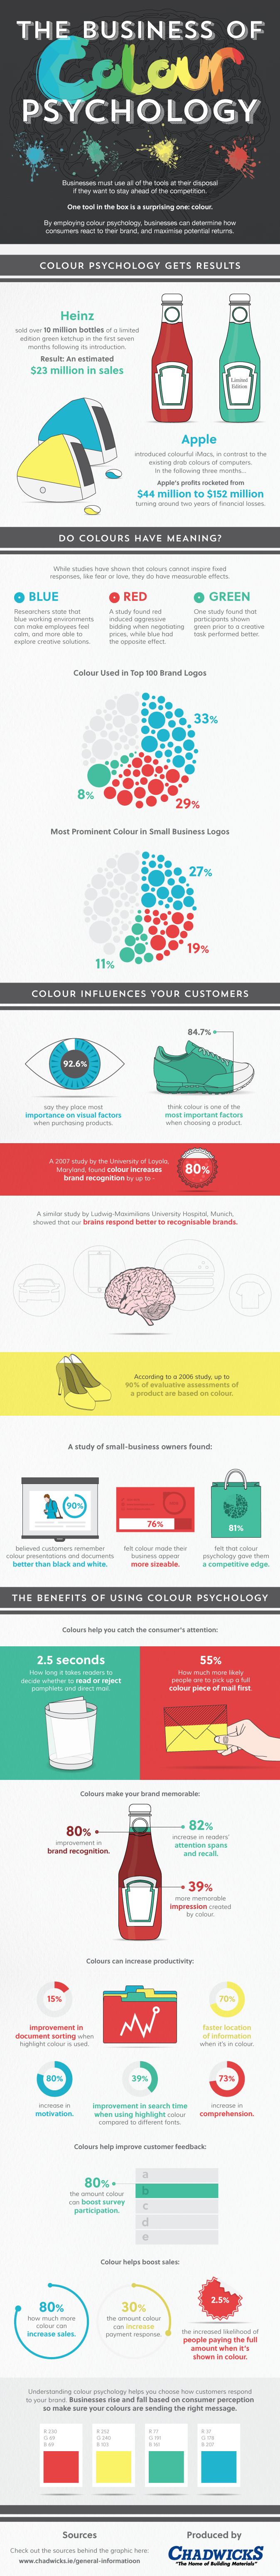 The Business of Colour Psychology - #Infographic